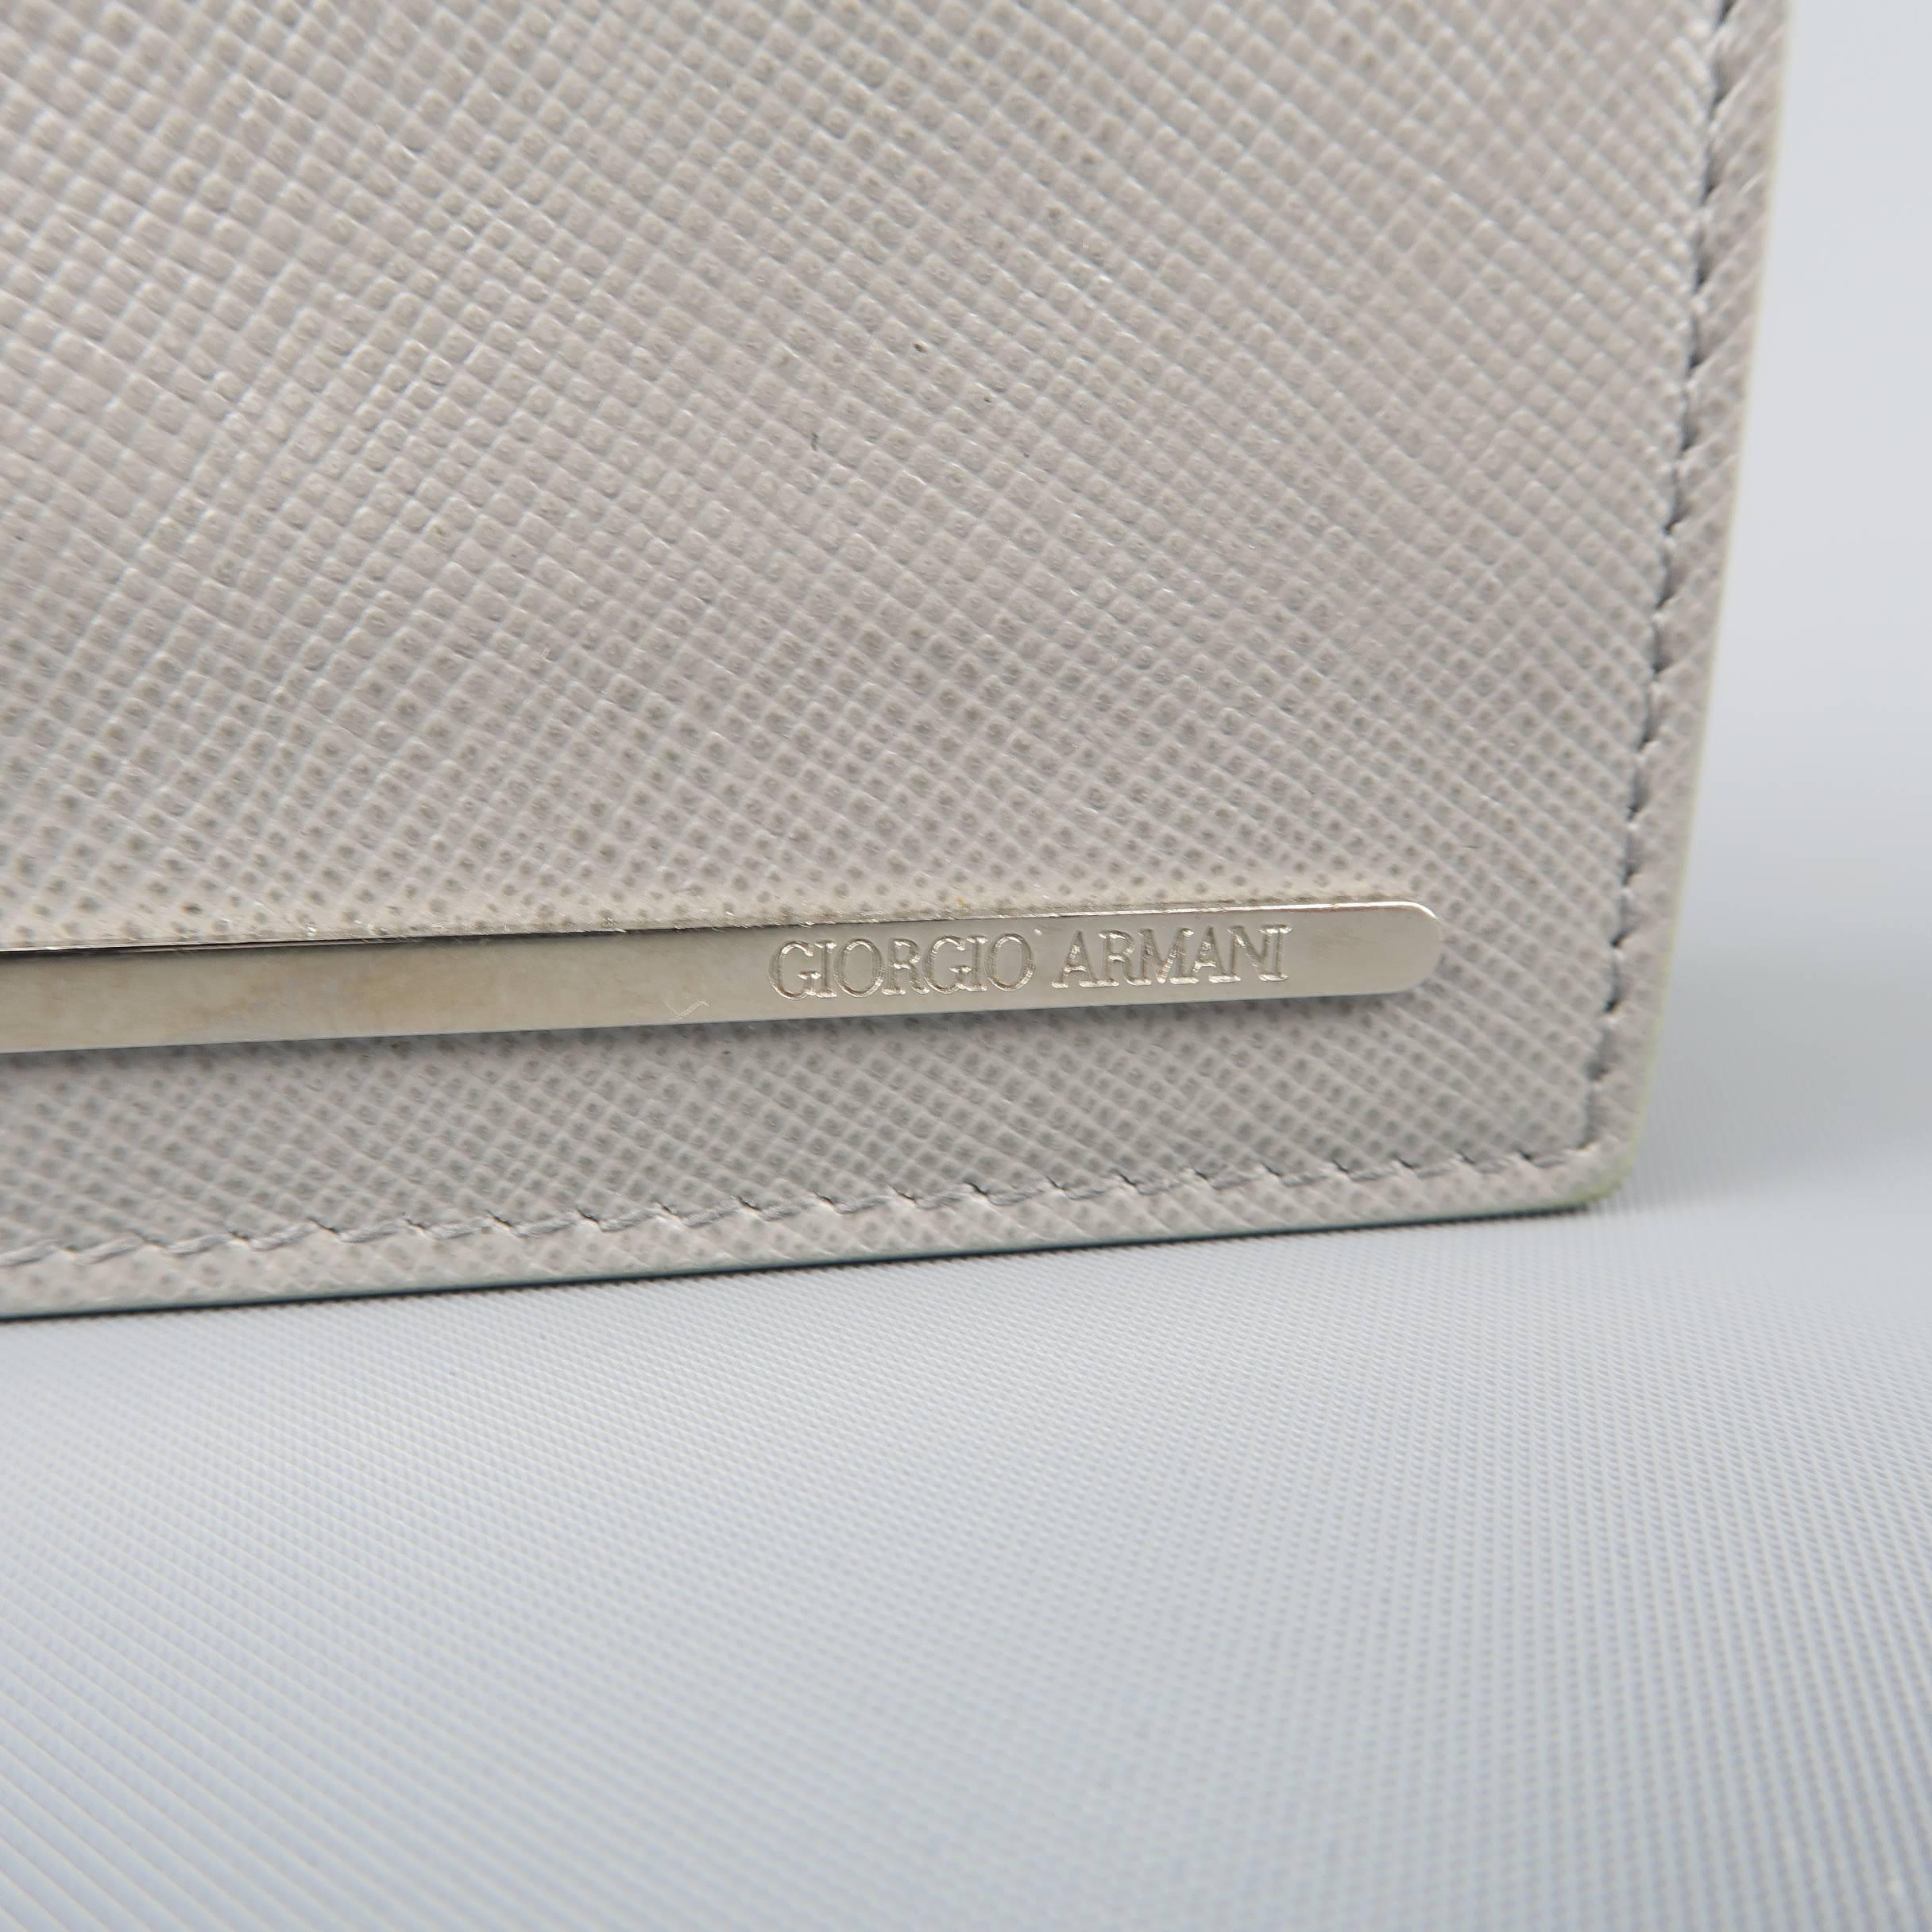 GIORGIO ARMANI bifold wallet comes in light gray textured leather with a silver tone embossed logo plaque, internal card slots and metal money clip. Made in Italy.
 
Fair Pre-Owned Condition.
 
4 x 3.25 in.
